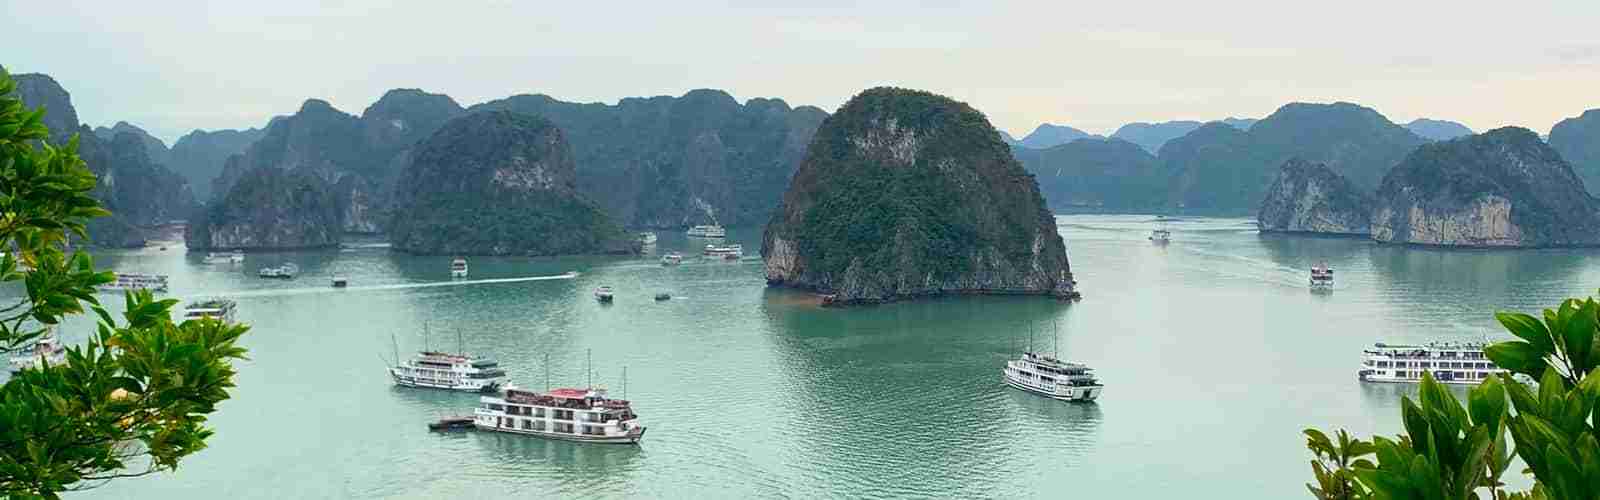 How To Get From Hanoi To Halong Bay Vietnam?